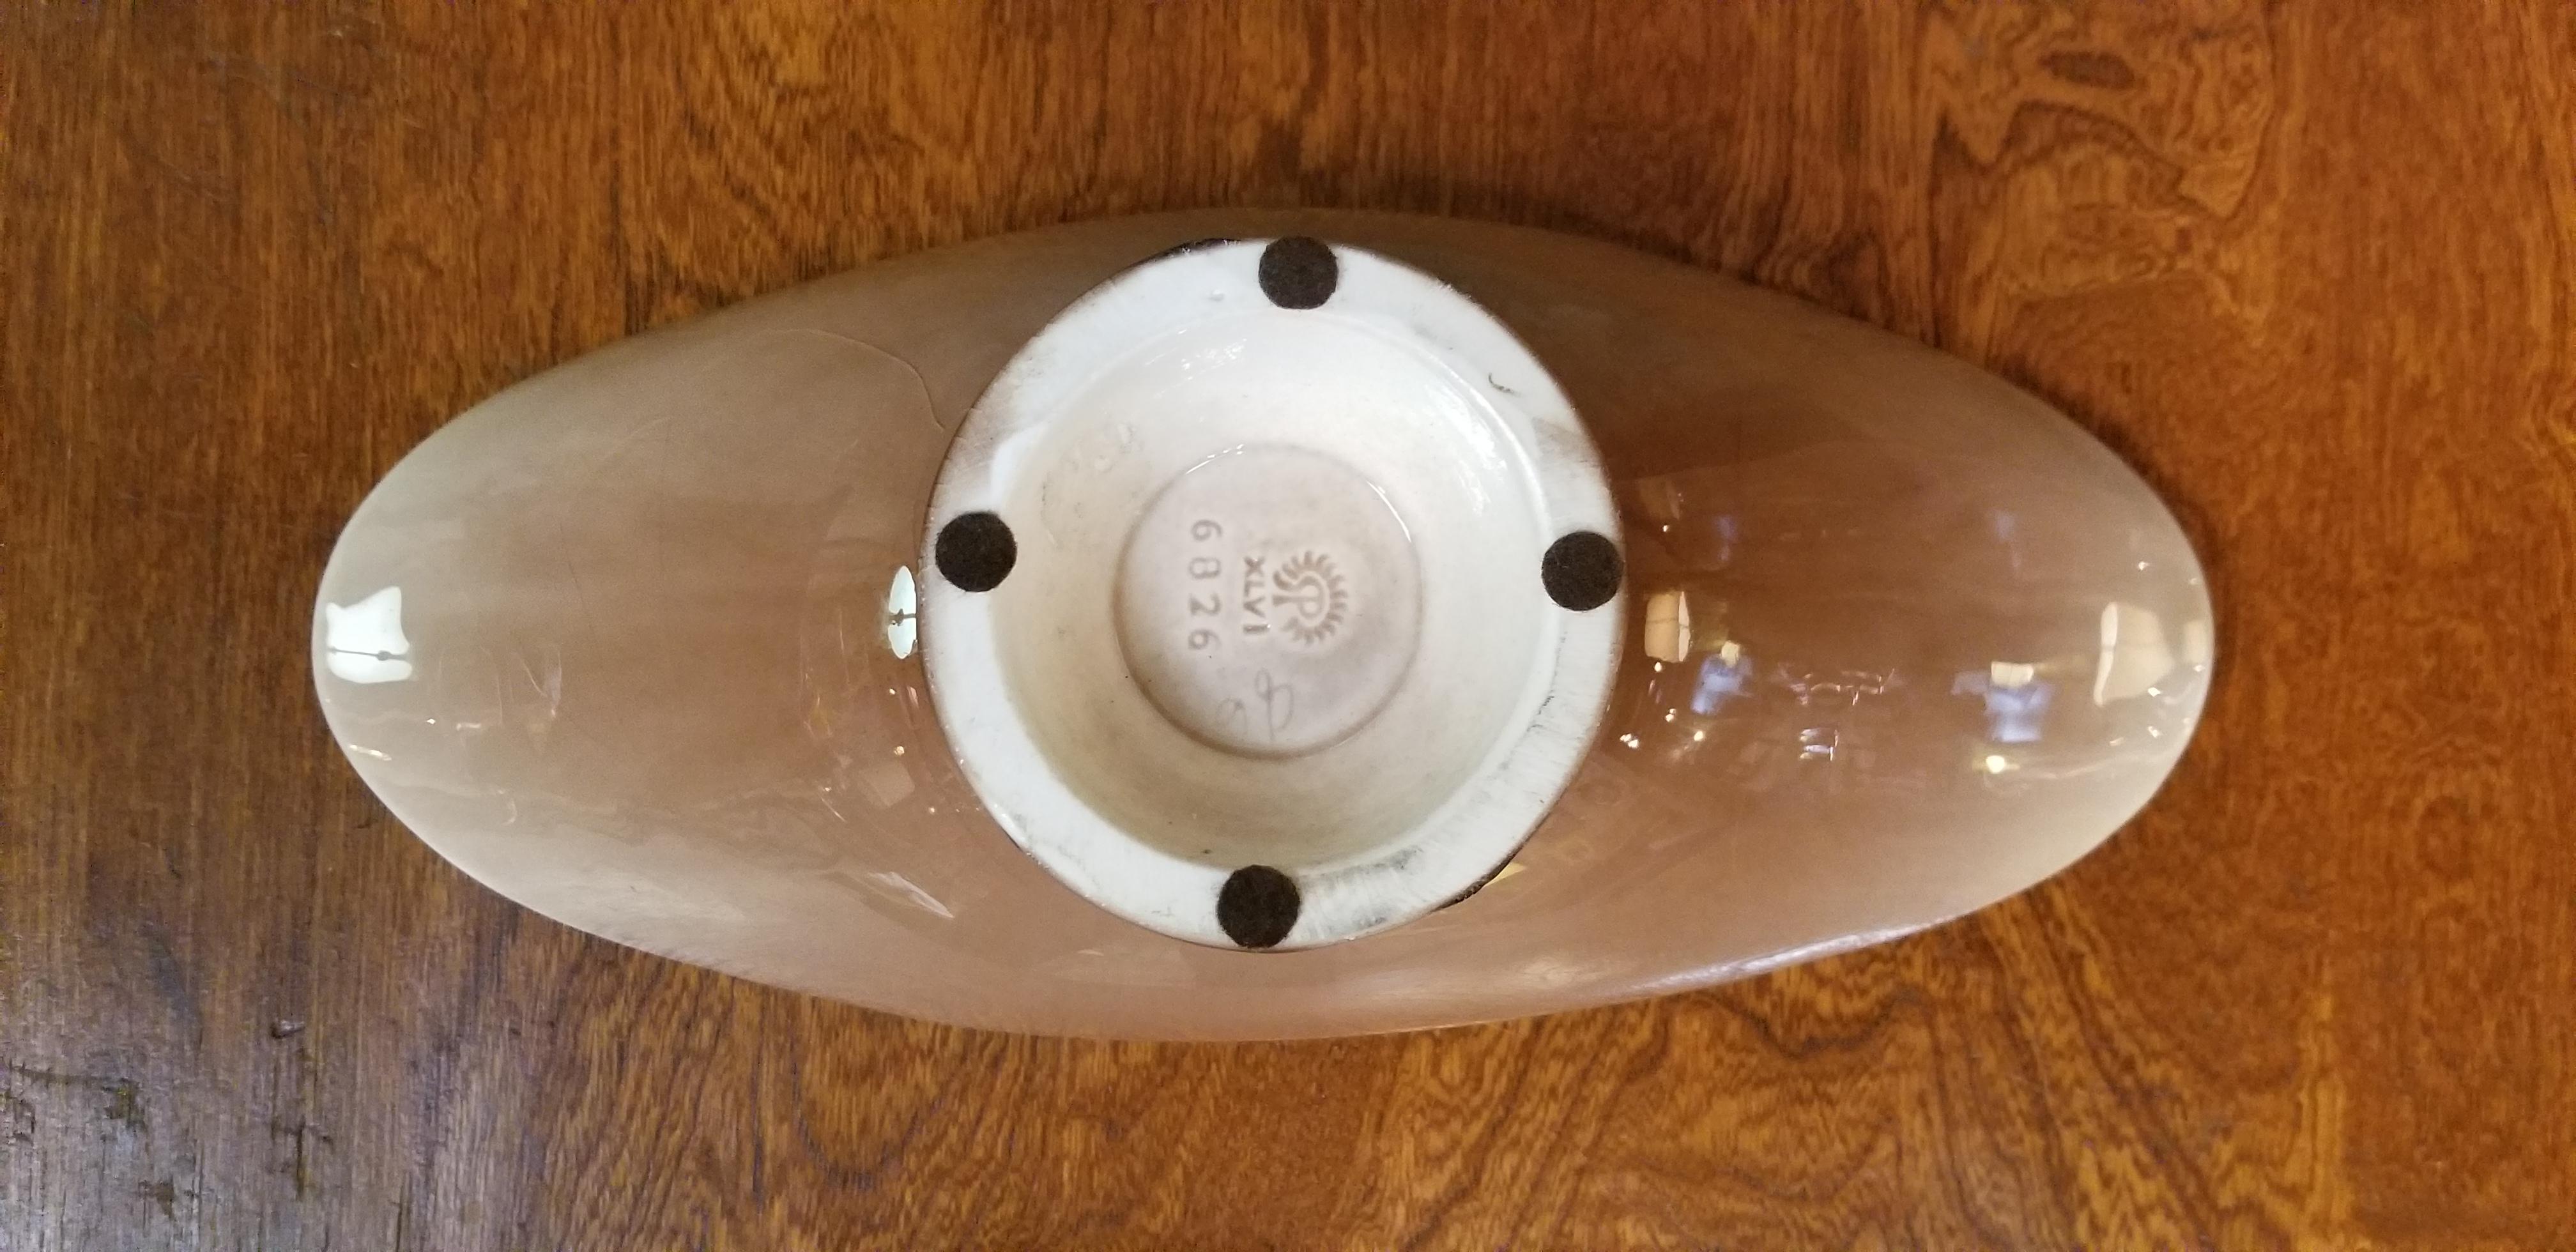 Rookwood Pottery Company Ceramic Vase or Center Bowl In Good Condition For Sale In Fulton, CA